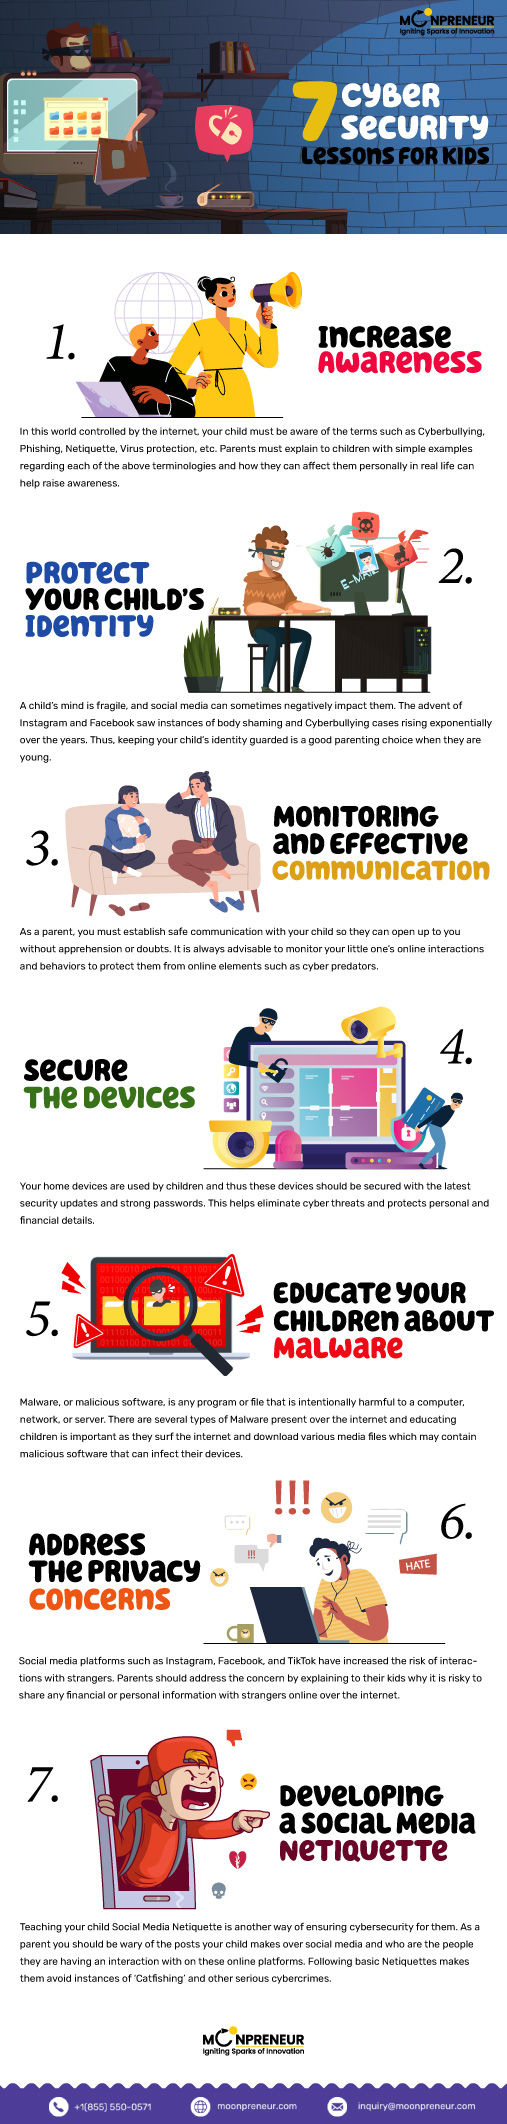 cybersecurity lessons for kids 